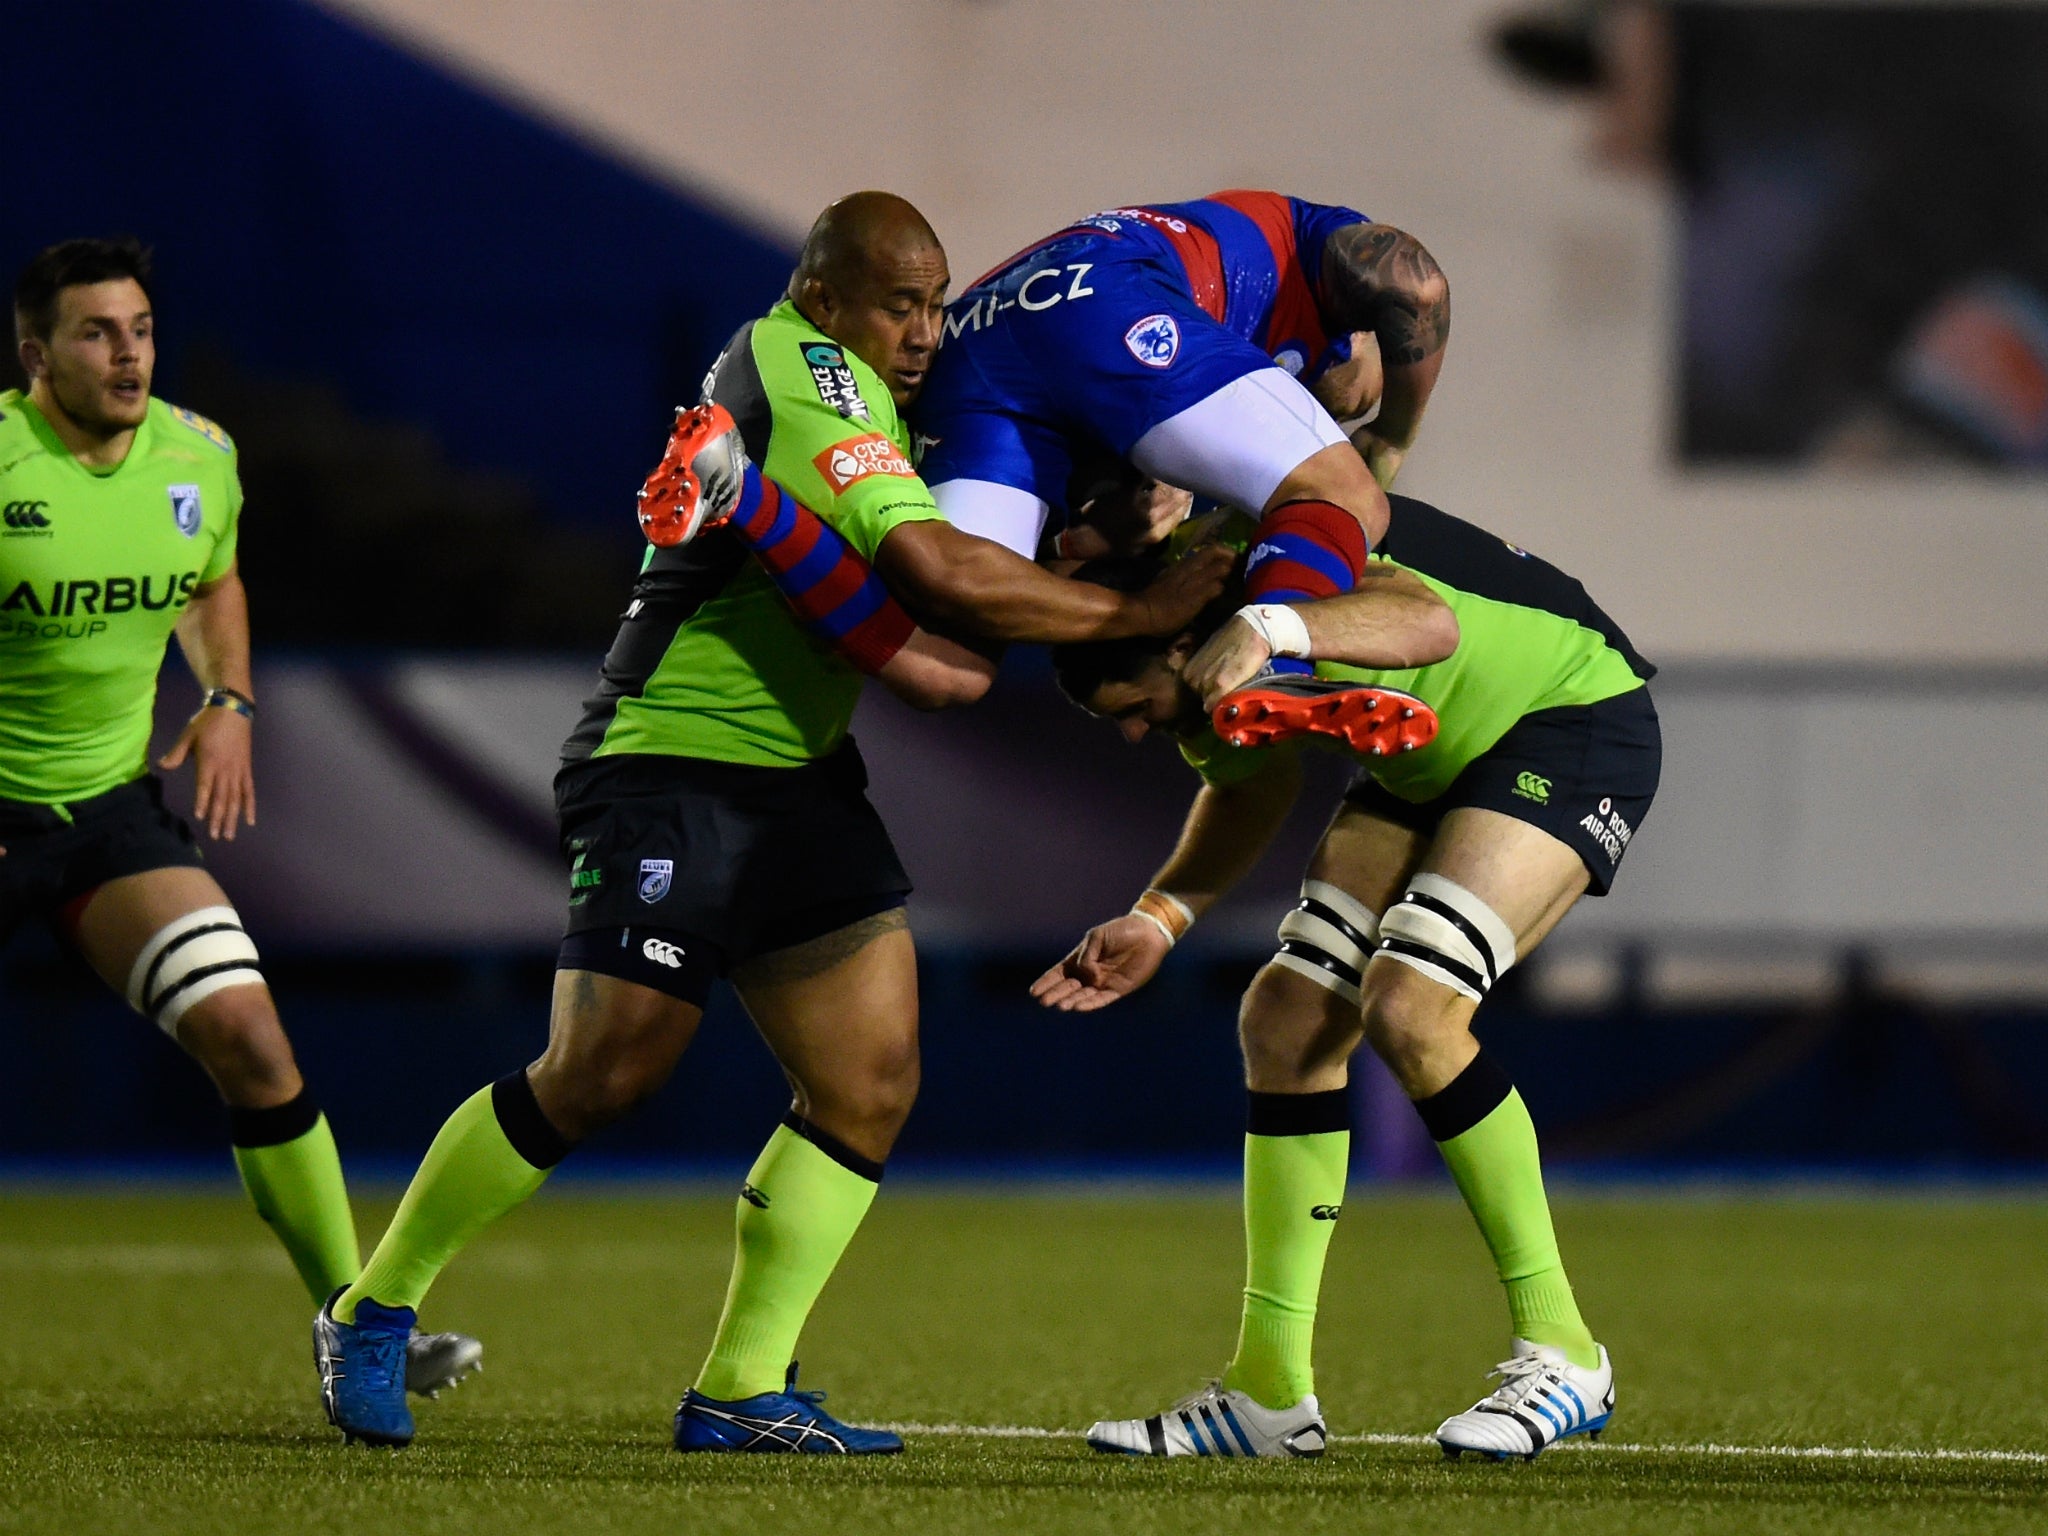 Taufa'ao Filise will make his 225th and final appearance for Cardiff this Friday